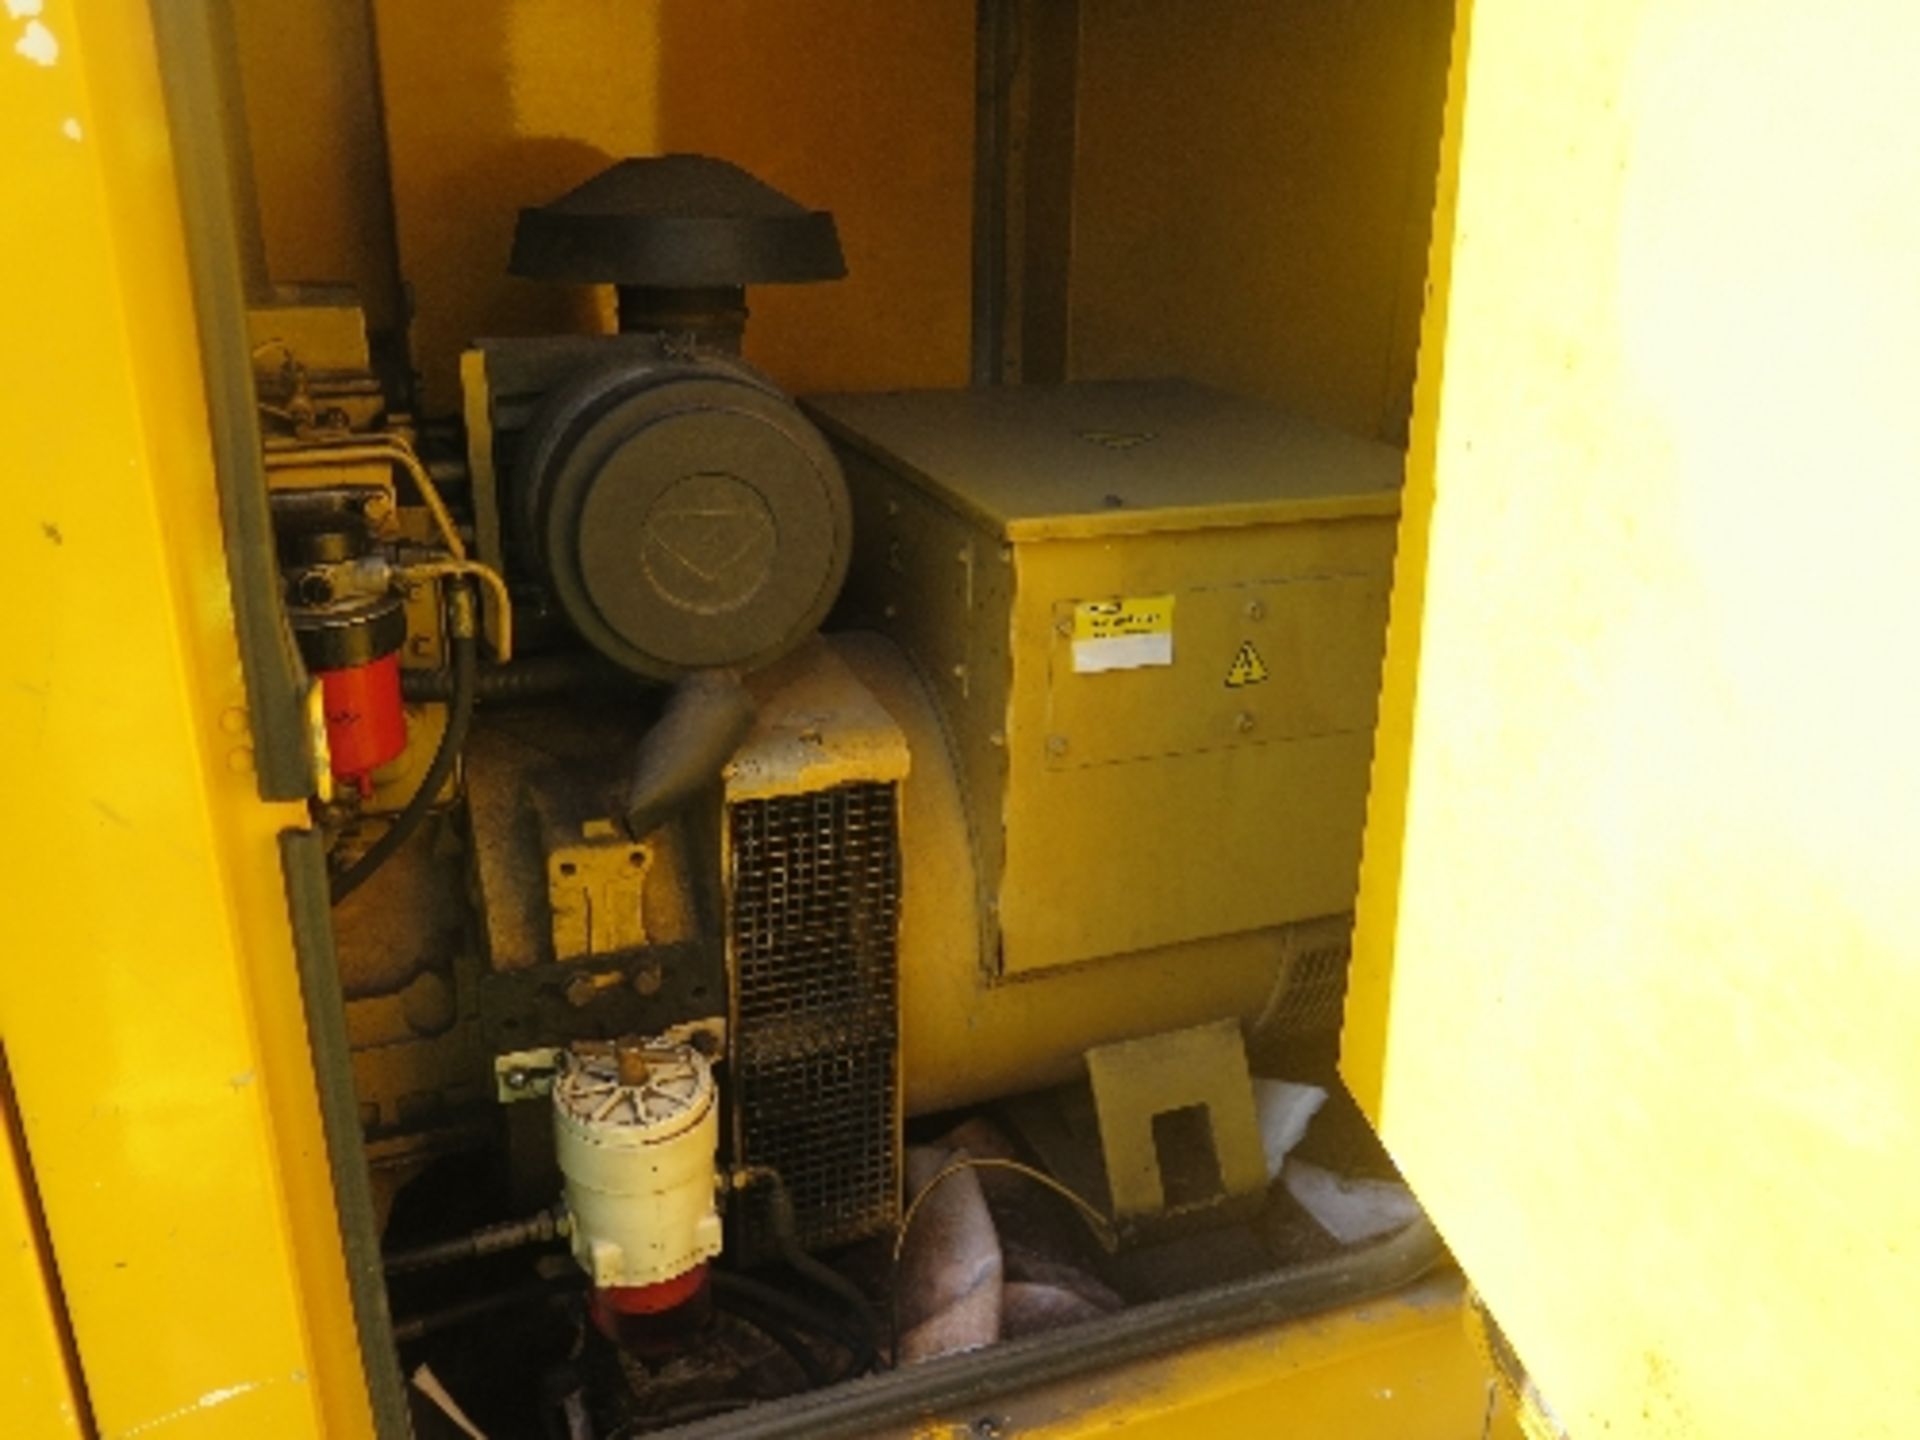 Caterpillar XQE100 generator 30132 hrs 138851
PERKINS - RUNS AND MAKES POWER
ALL LOTS are SOLD - Image 4 of 6